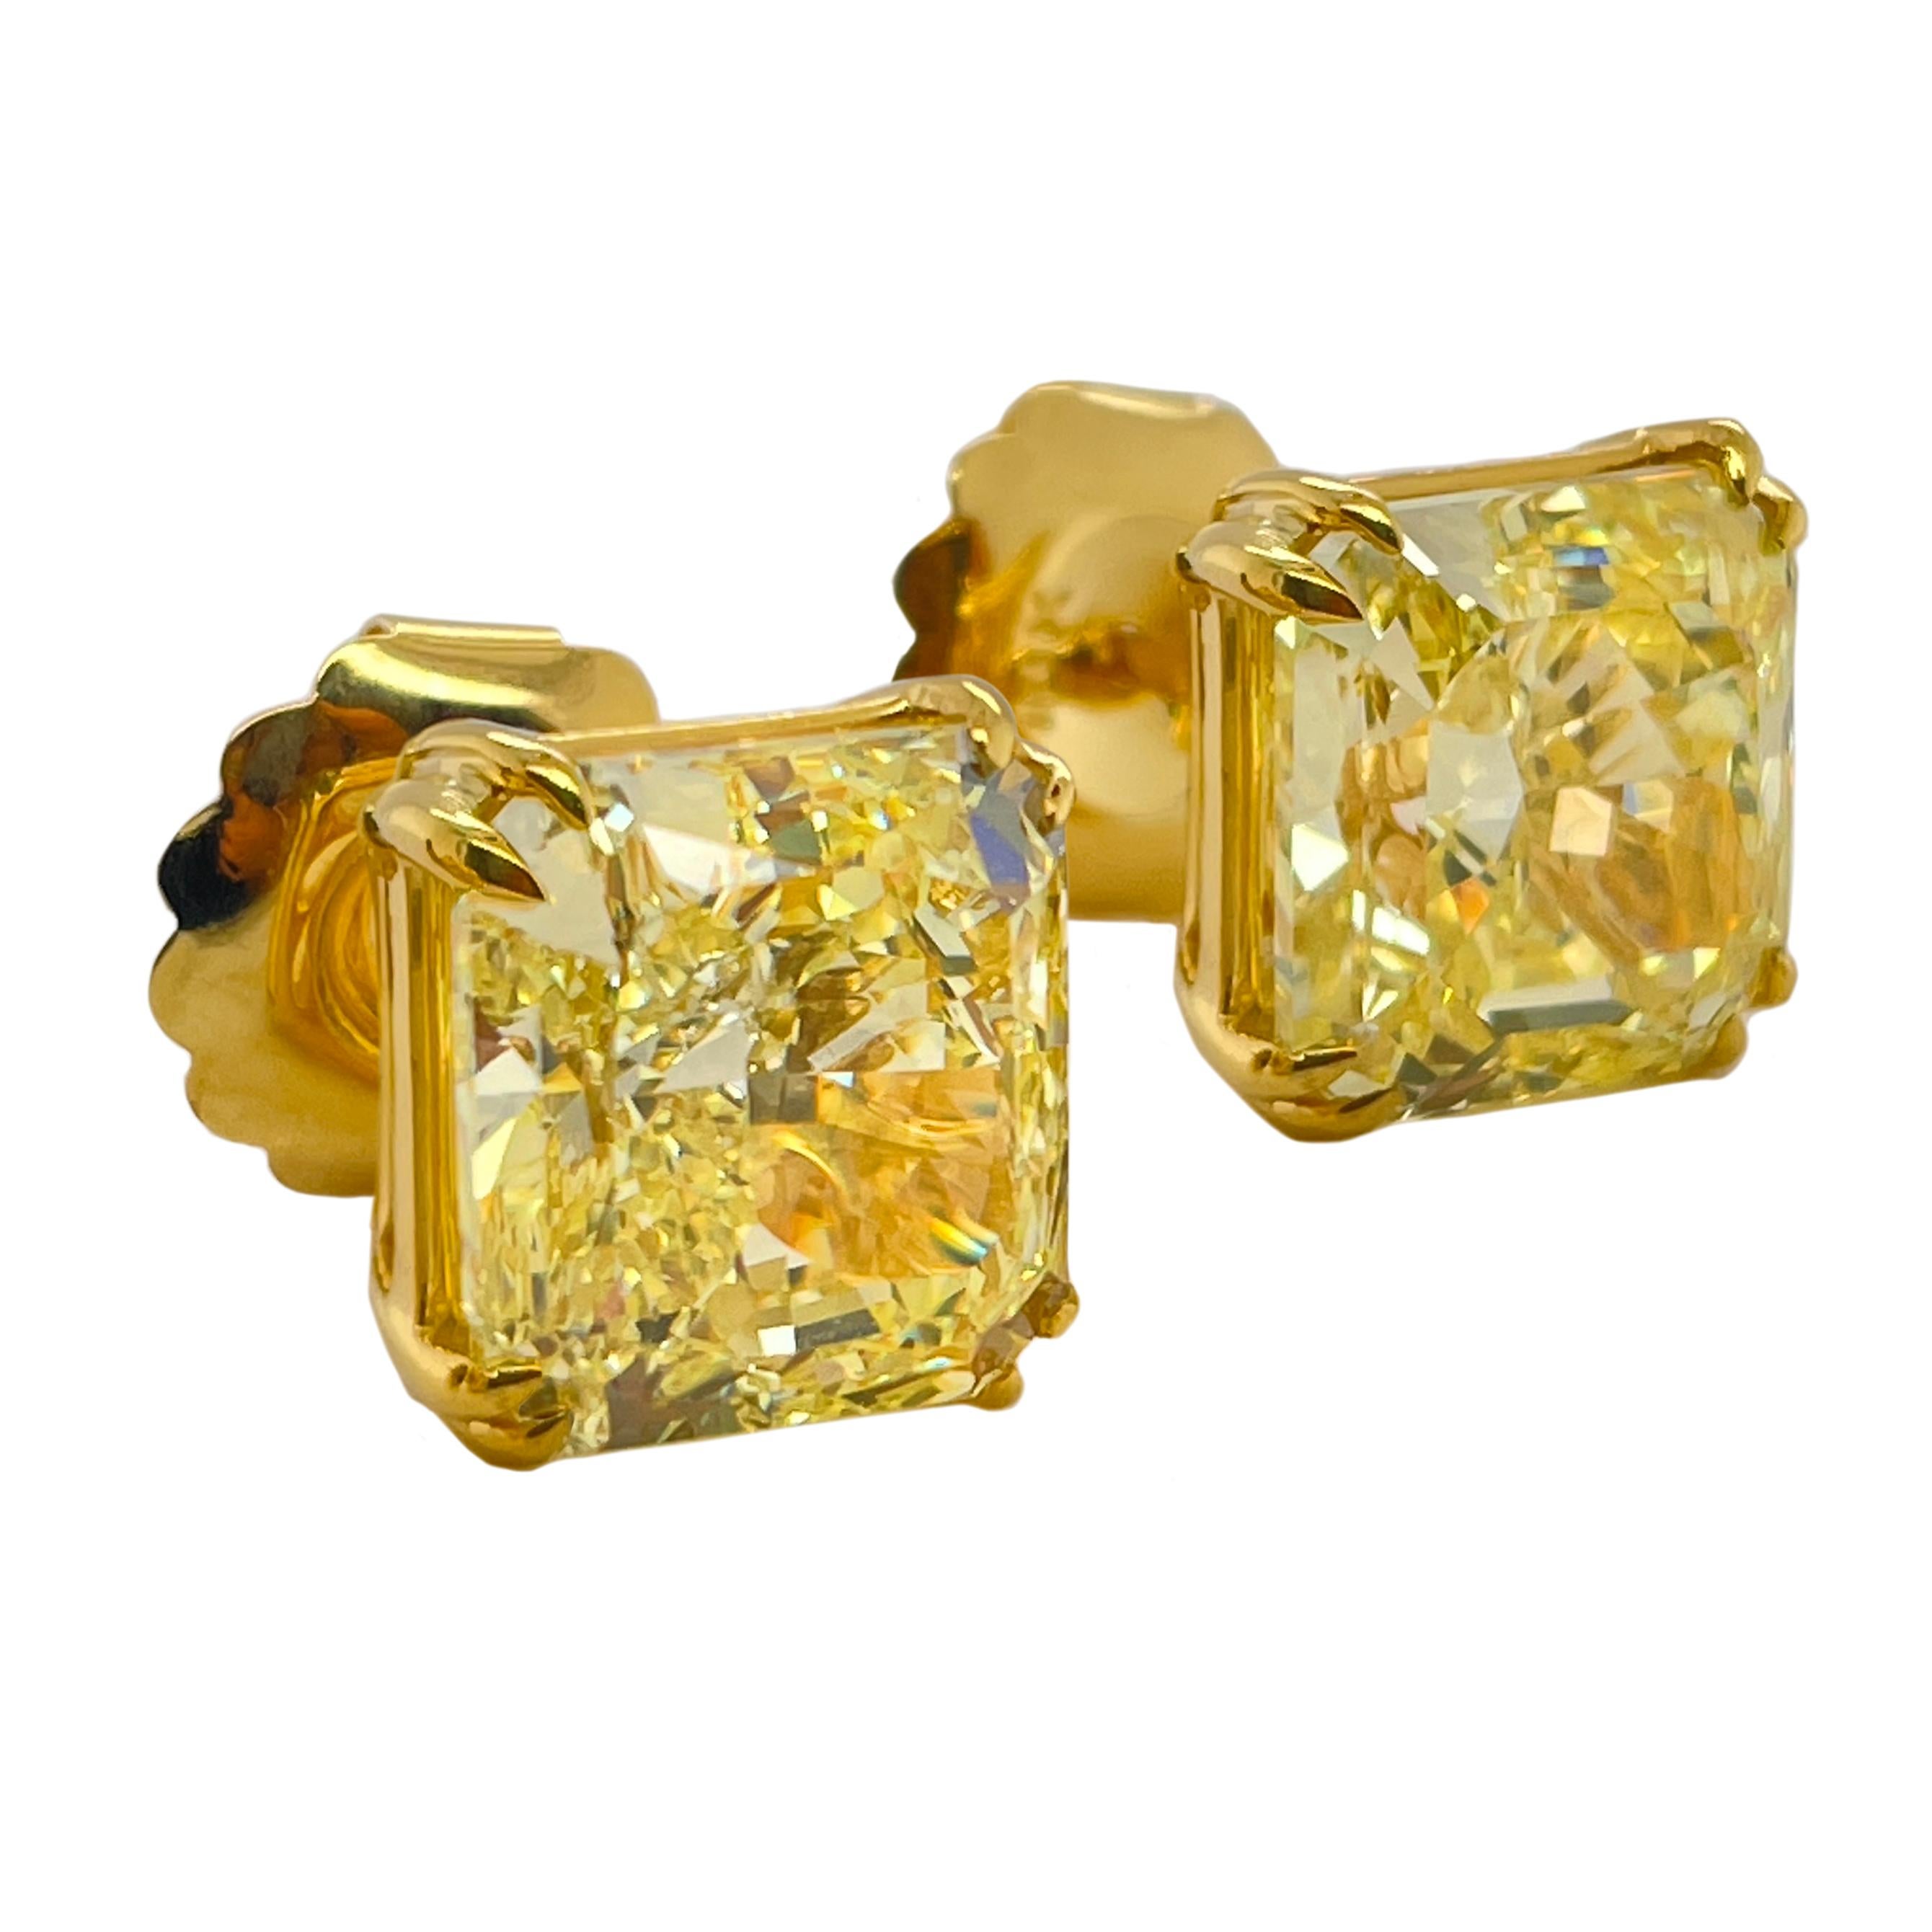 5.04 and 5.14 carat Radiant Cut Fancy Yellow Diamond Studs on 18 Carat Gold.
Total diamond weight 10.18 carats.
Accompanied by GIA reports:
5.04 Carat Radiant Cut : GIA 15068682 stating that the diamond is Natural Fancy Yellow Color, VVS1